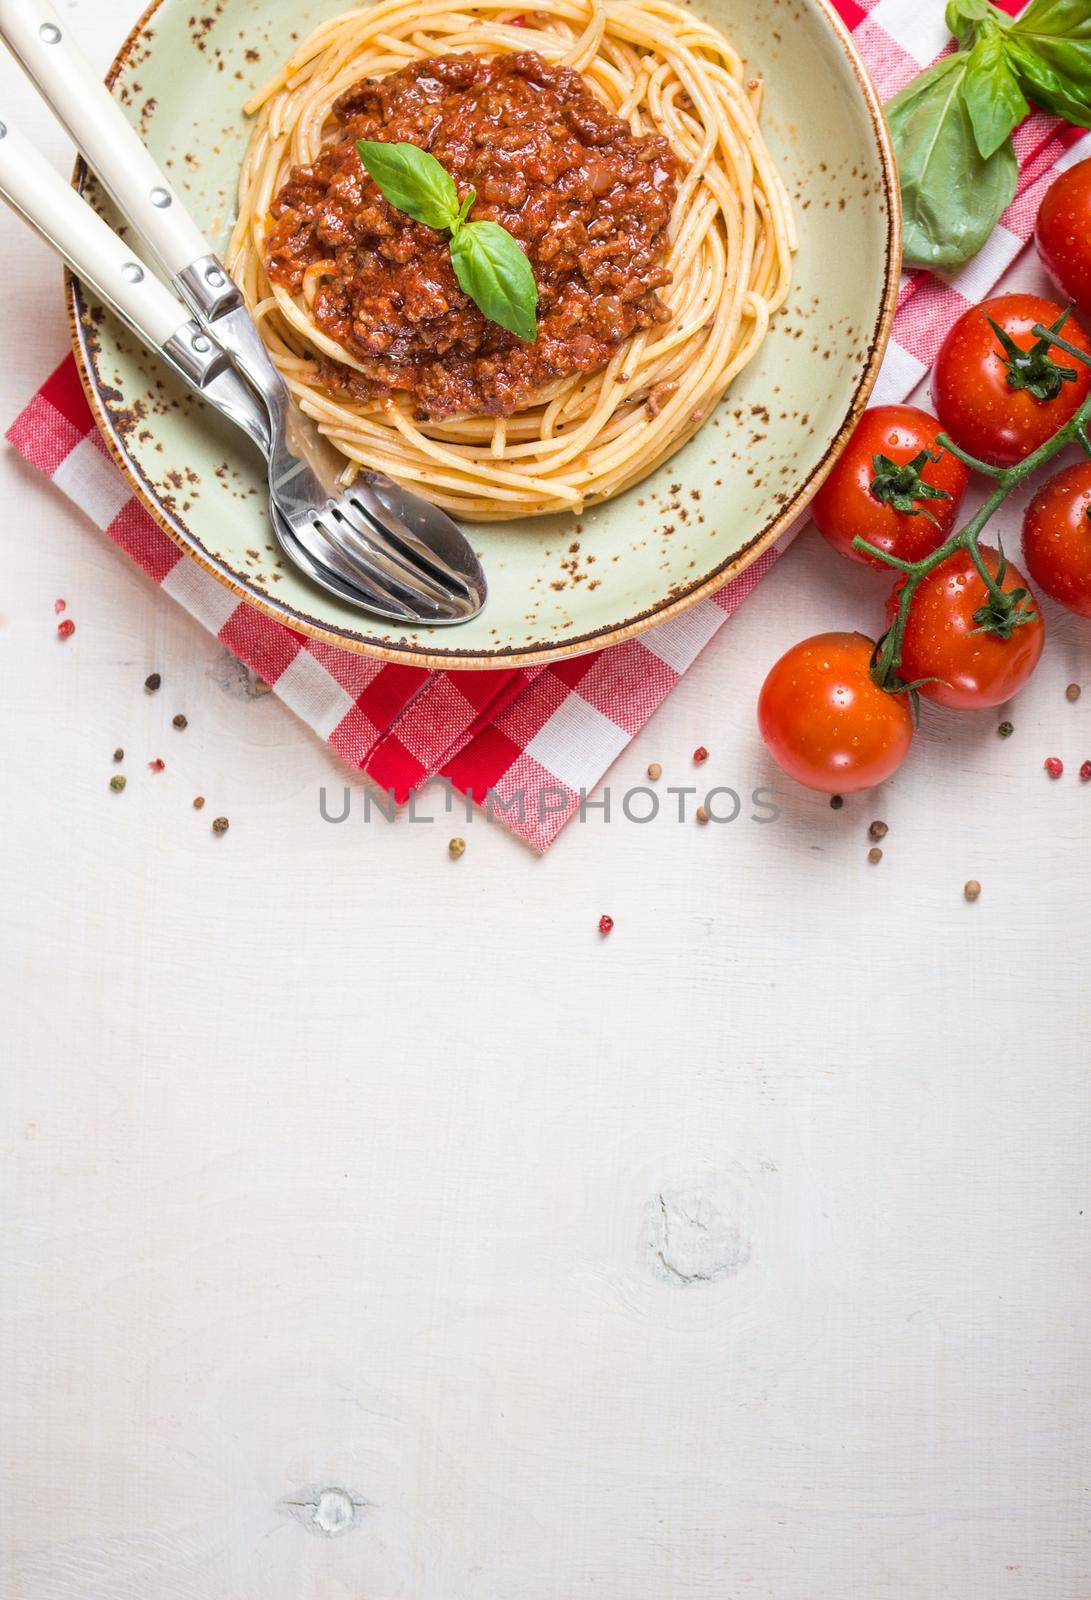 Italian pasta bolognese. Spaghetti with meat and tomato sauce in a plate with Italian tablecloth on a wooden white background. With fresh cherry tomatoes, basil. Food frame. Space for text. Top view